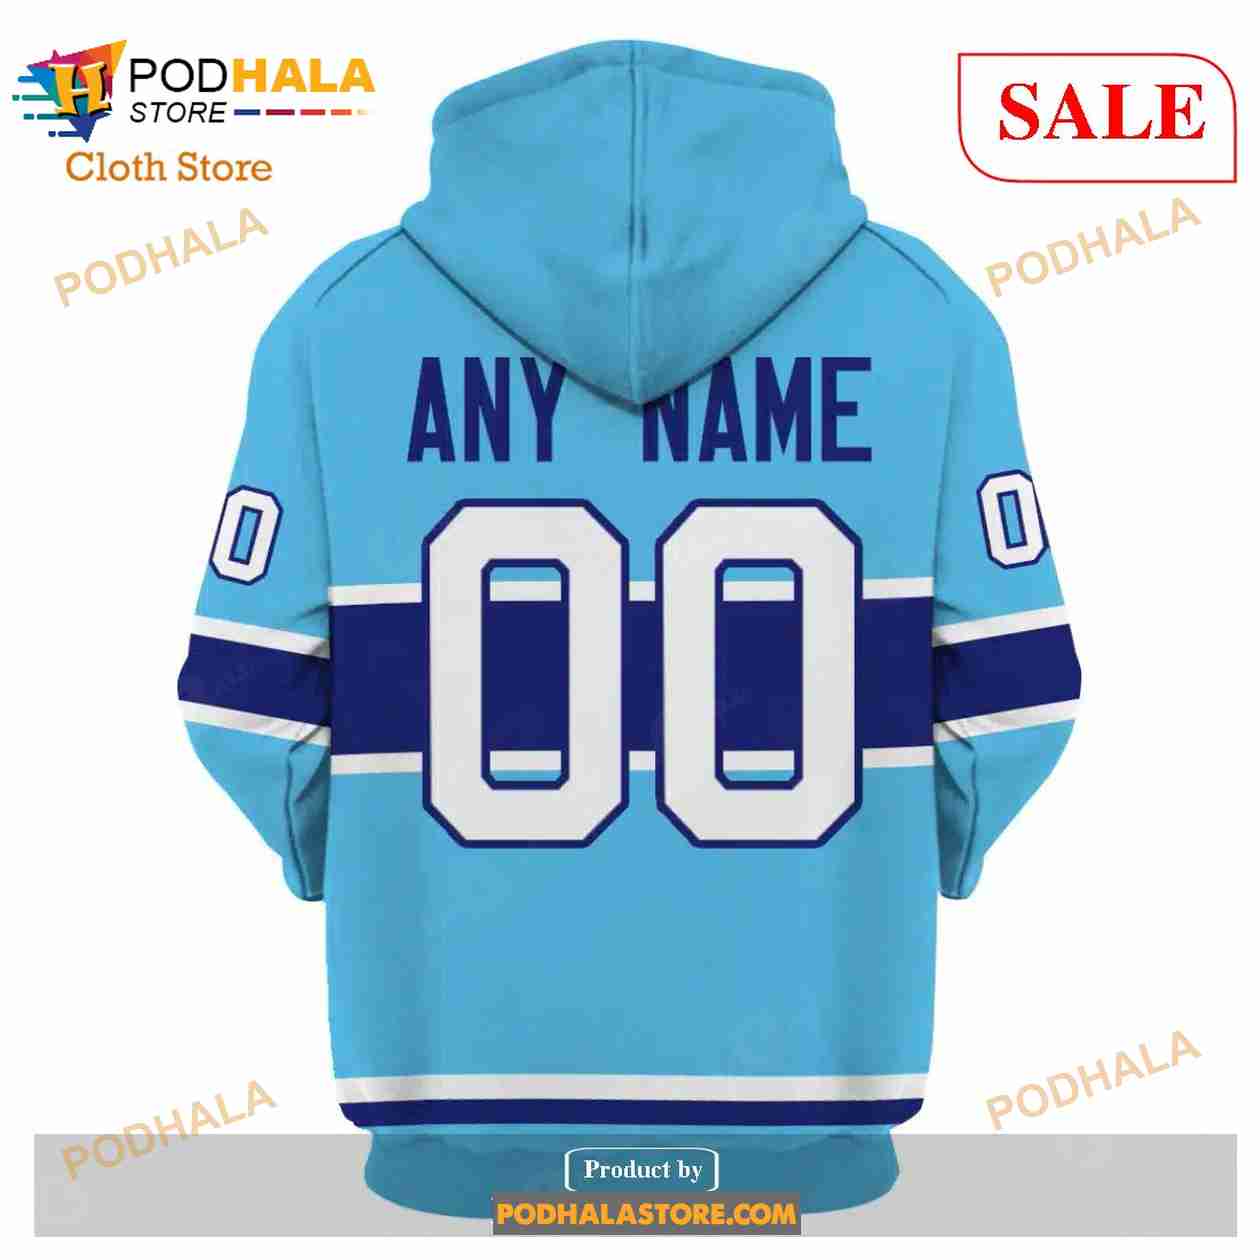 Nhl Montreal Canadiens Reverse Retro 3D Hockey Jerseys Personalized Name  Number